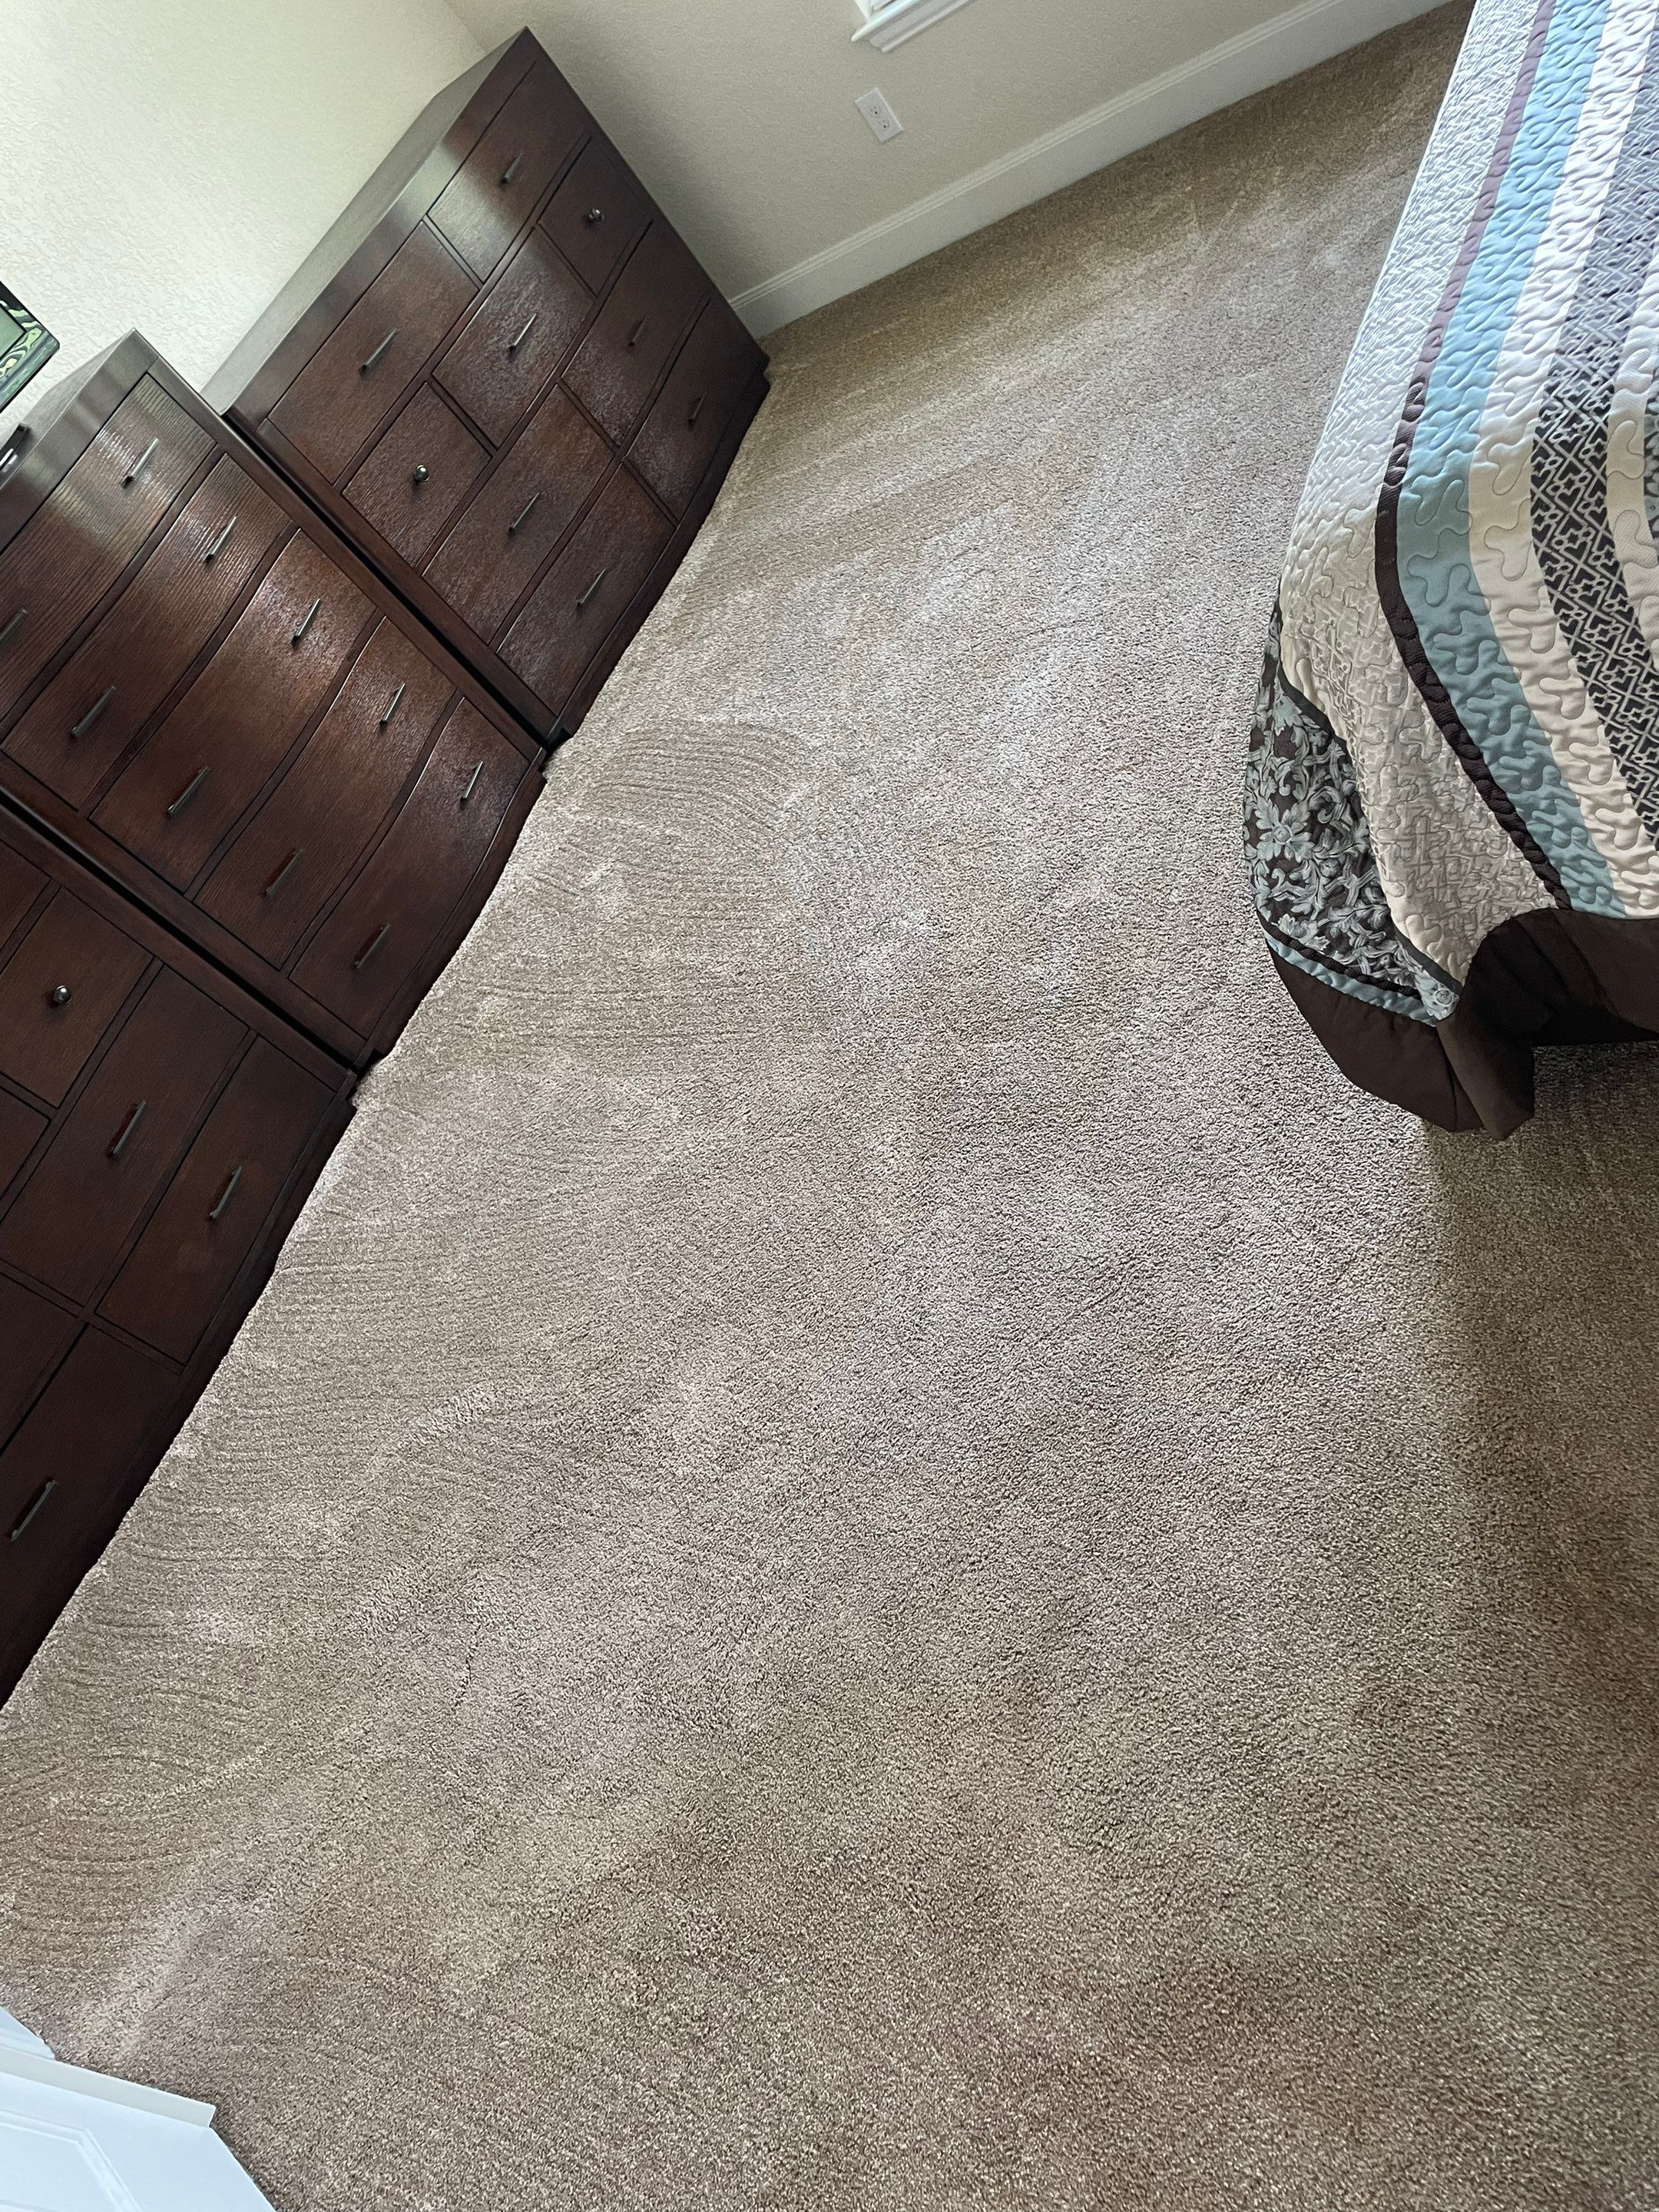 carpet cleaning service removing dirt stains and refreshing carpet fibers in residential bedroom